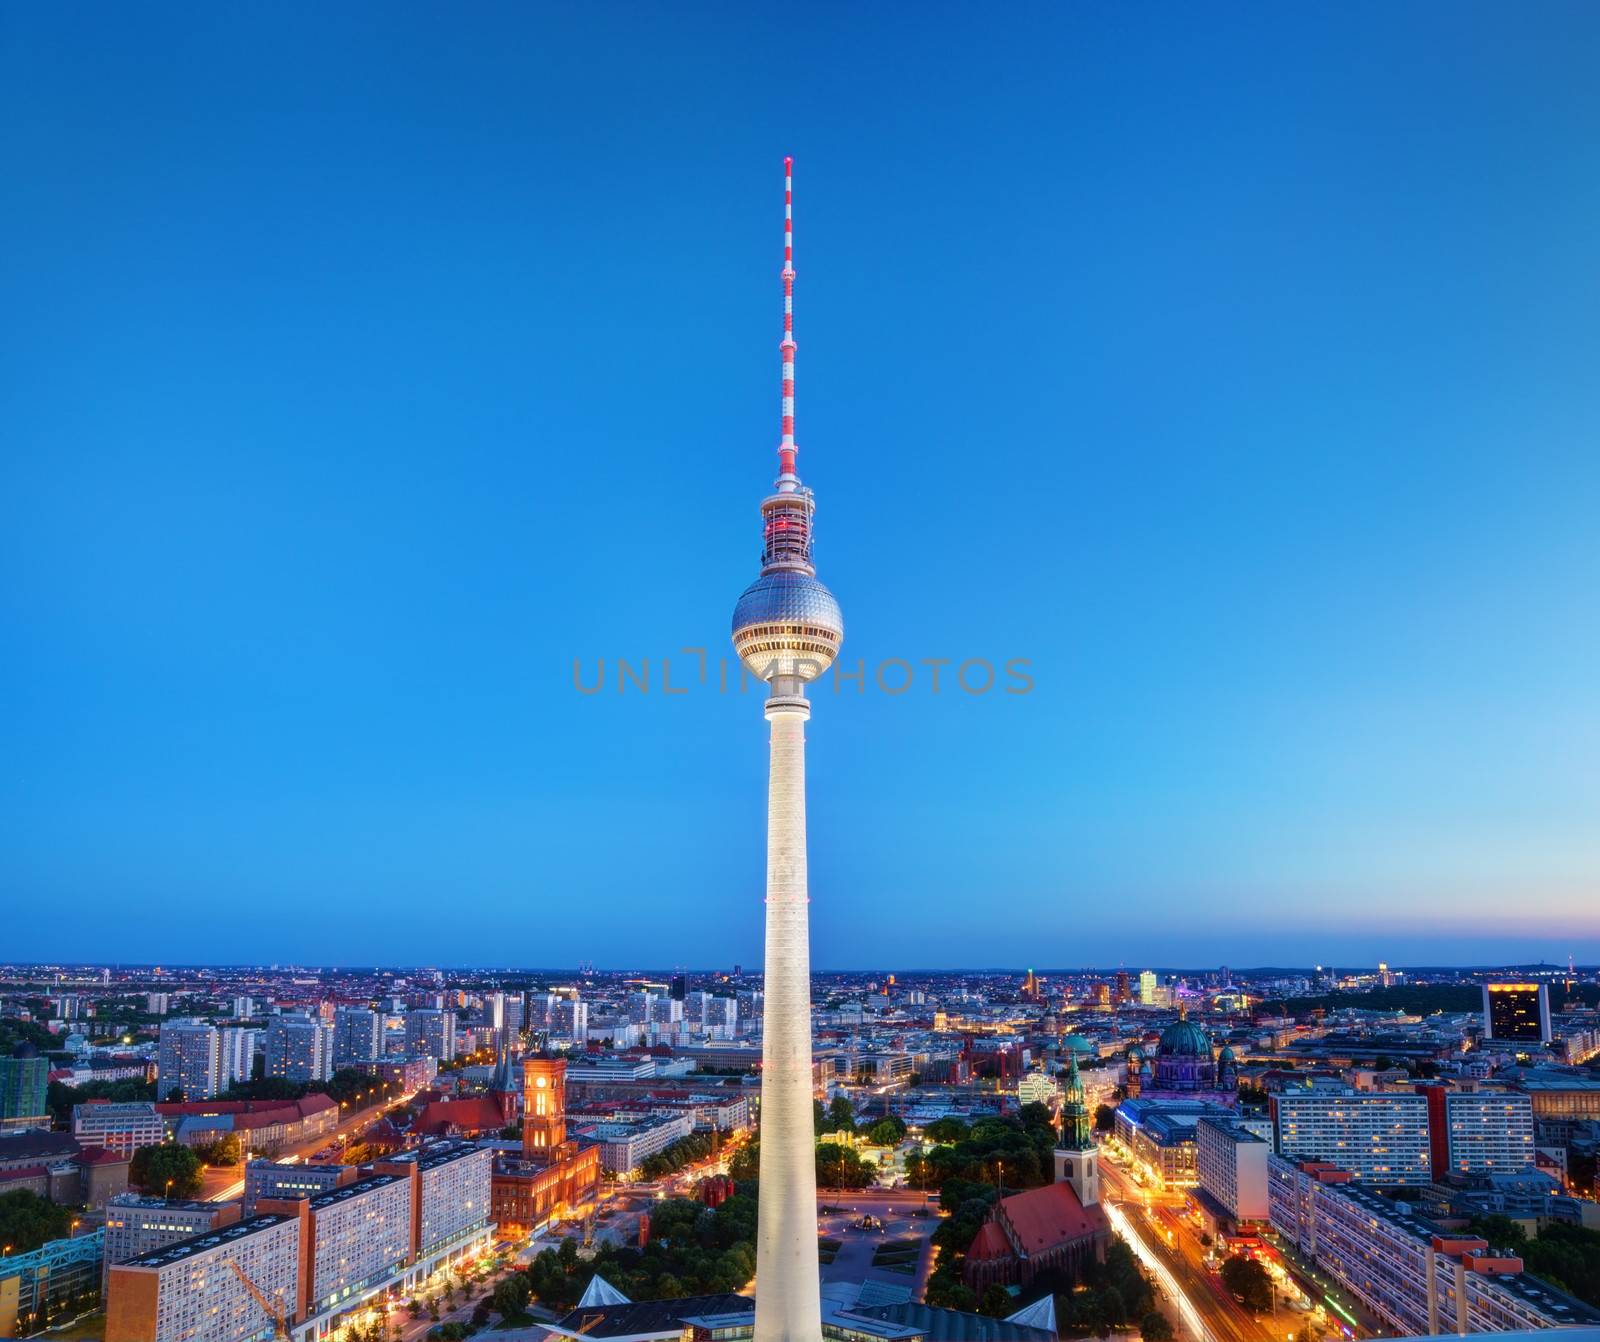 Tv tower or Fersehturm in Berlin, Germany at night